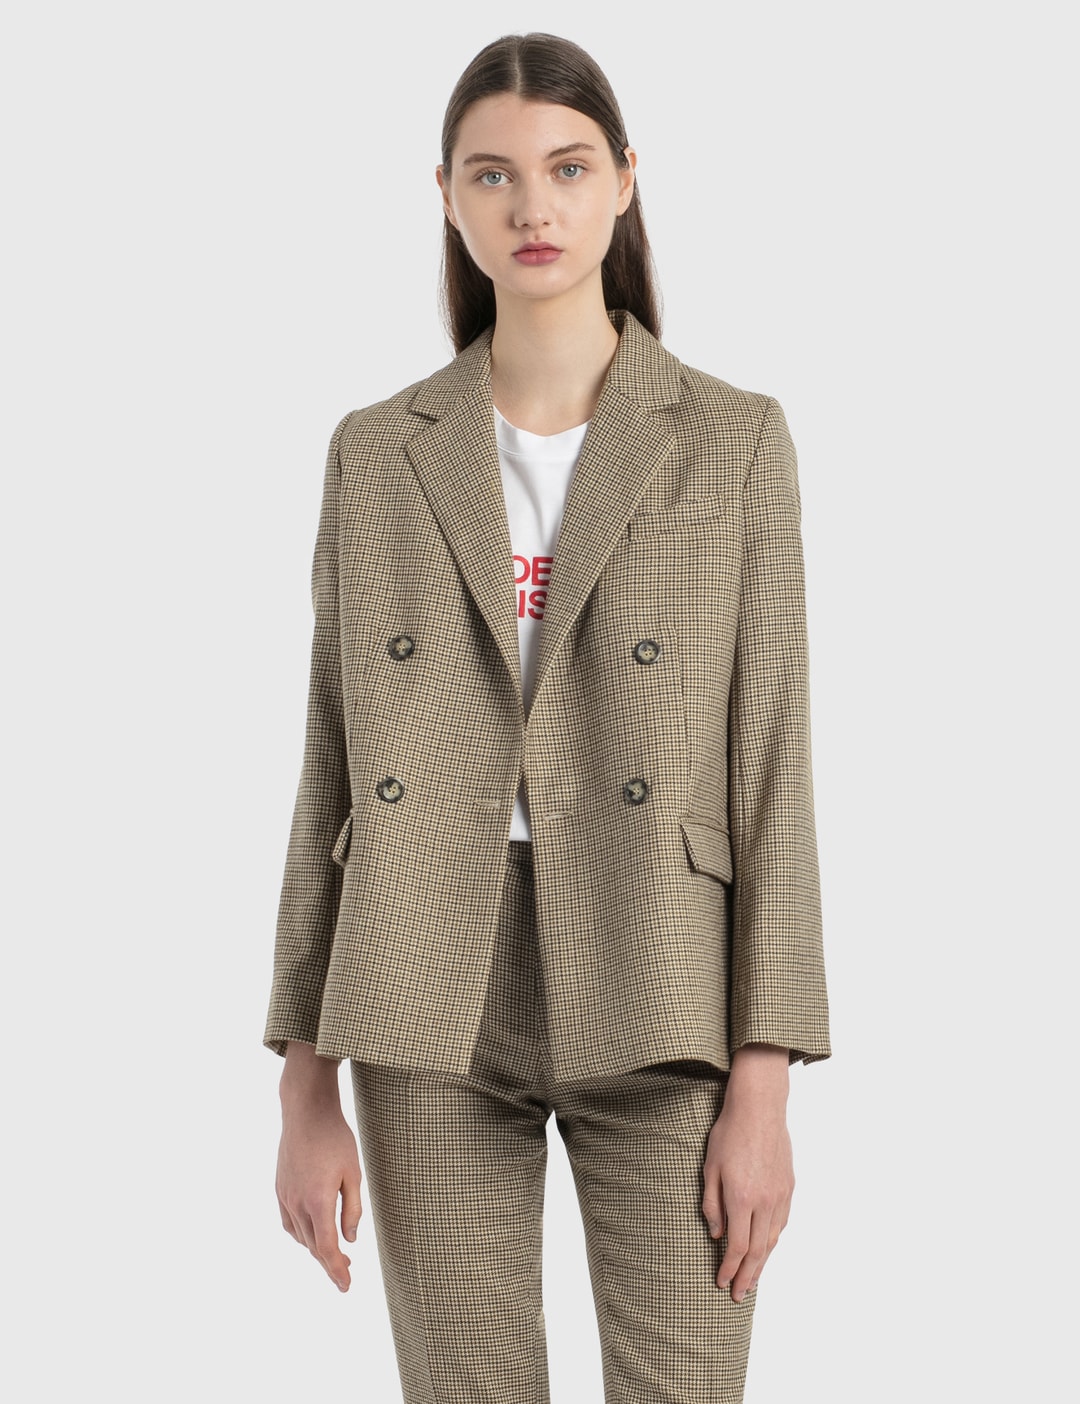 A.P.C. - Prune Jacket | HBX - Globally Curated Fashion and Lifestyle by ...